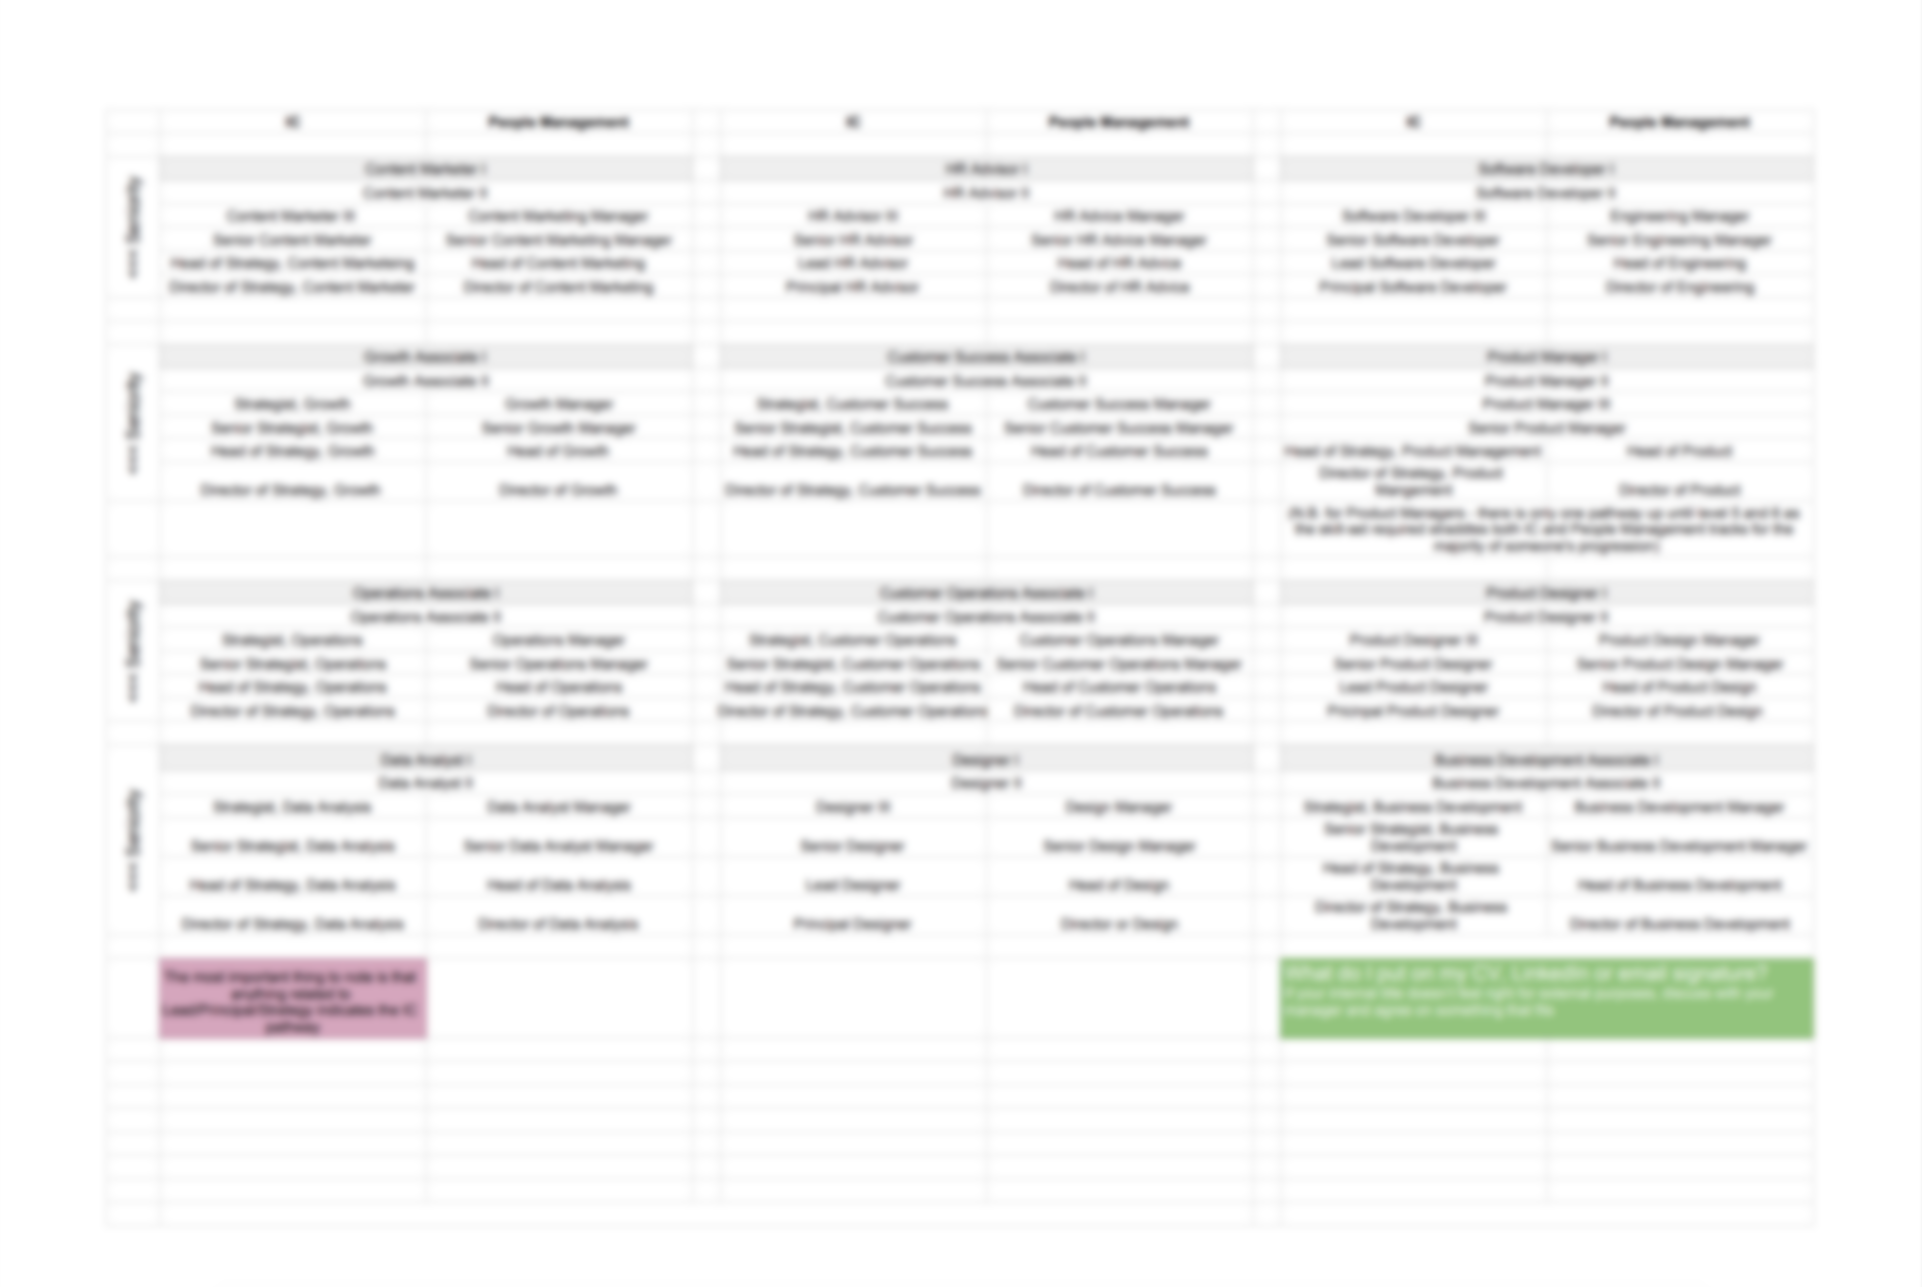 Blurred screenshot of manager and contributors pathways at CharlieHR